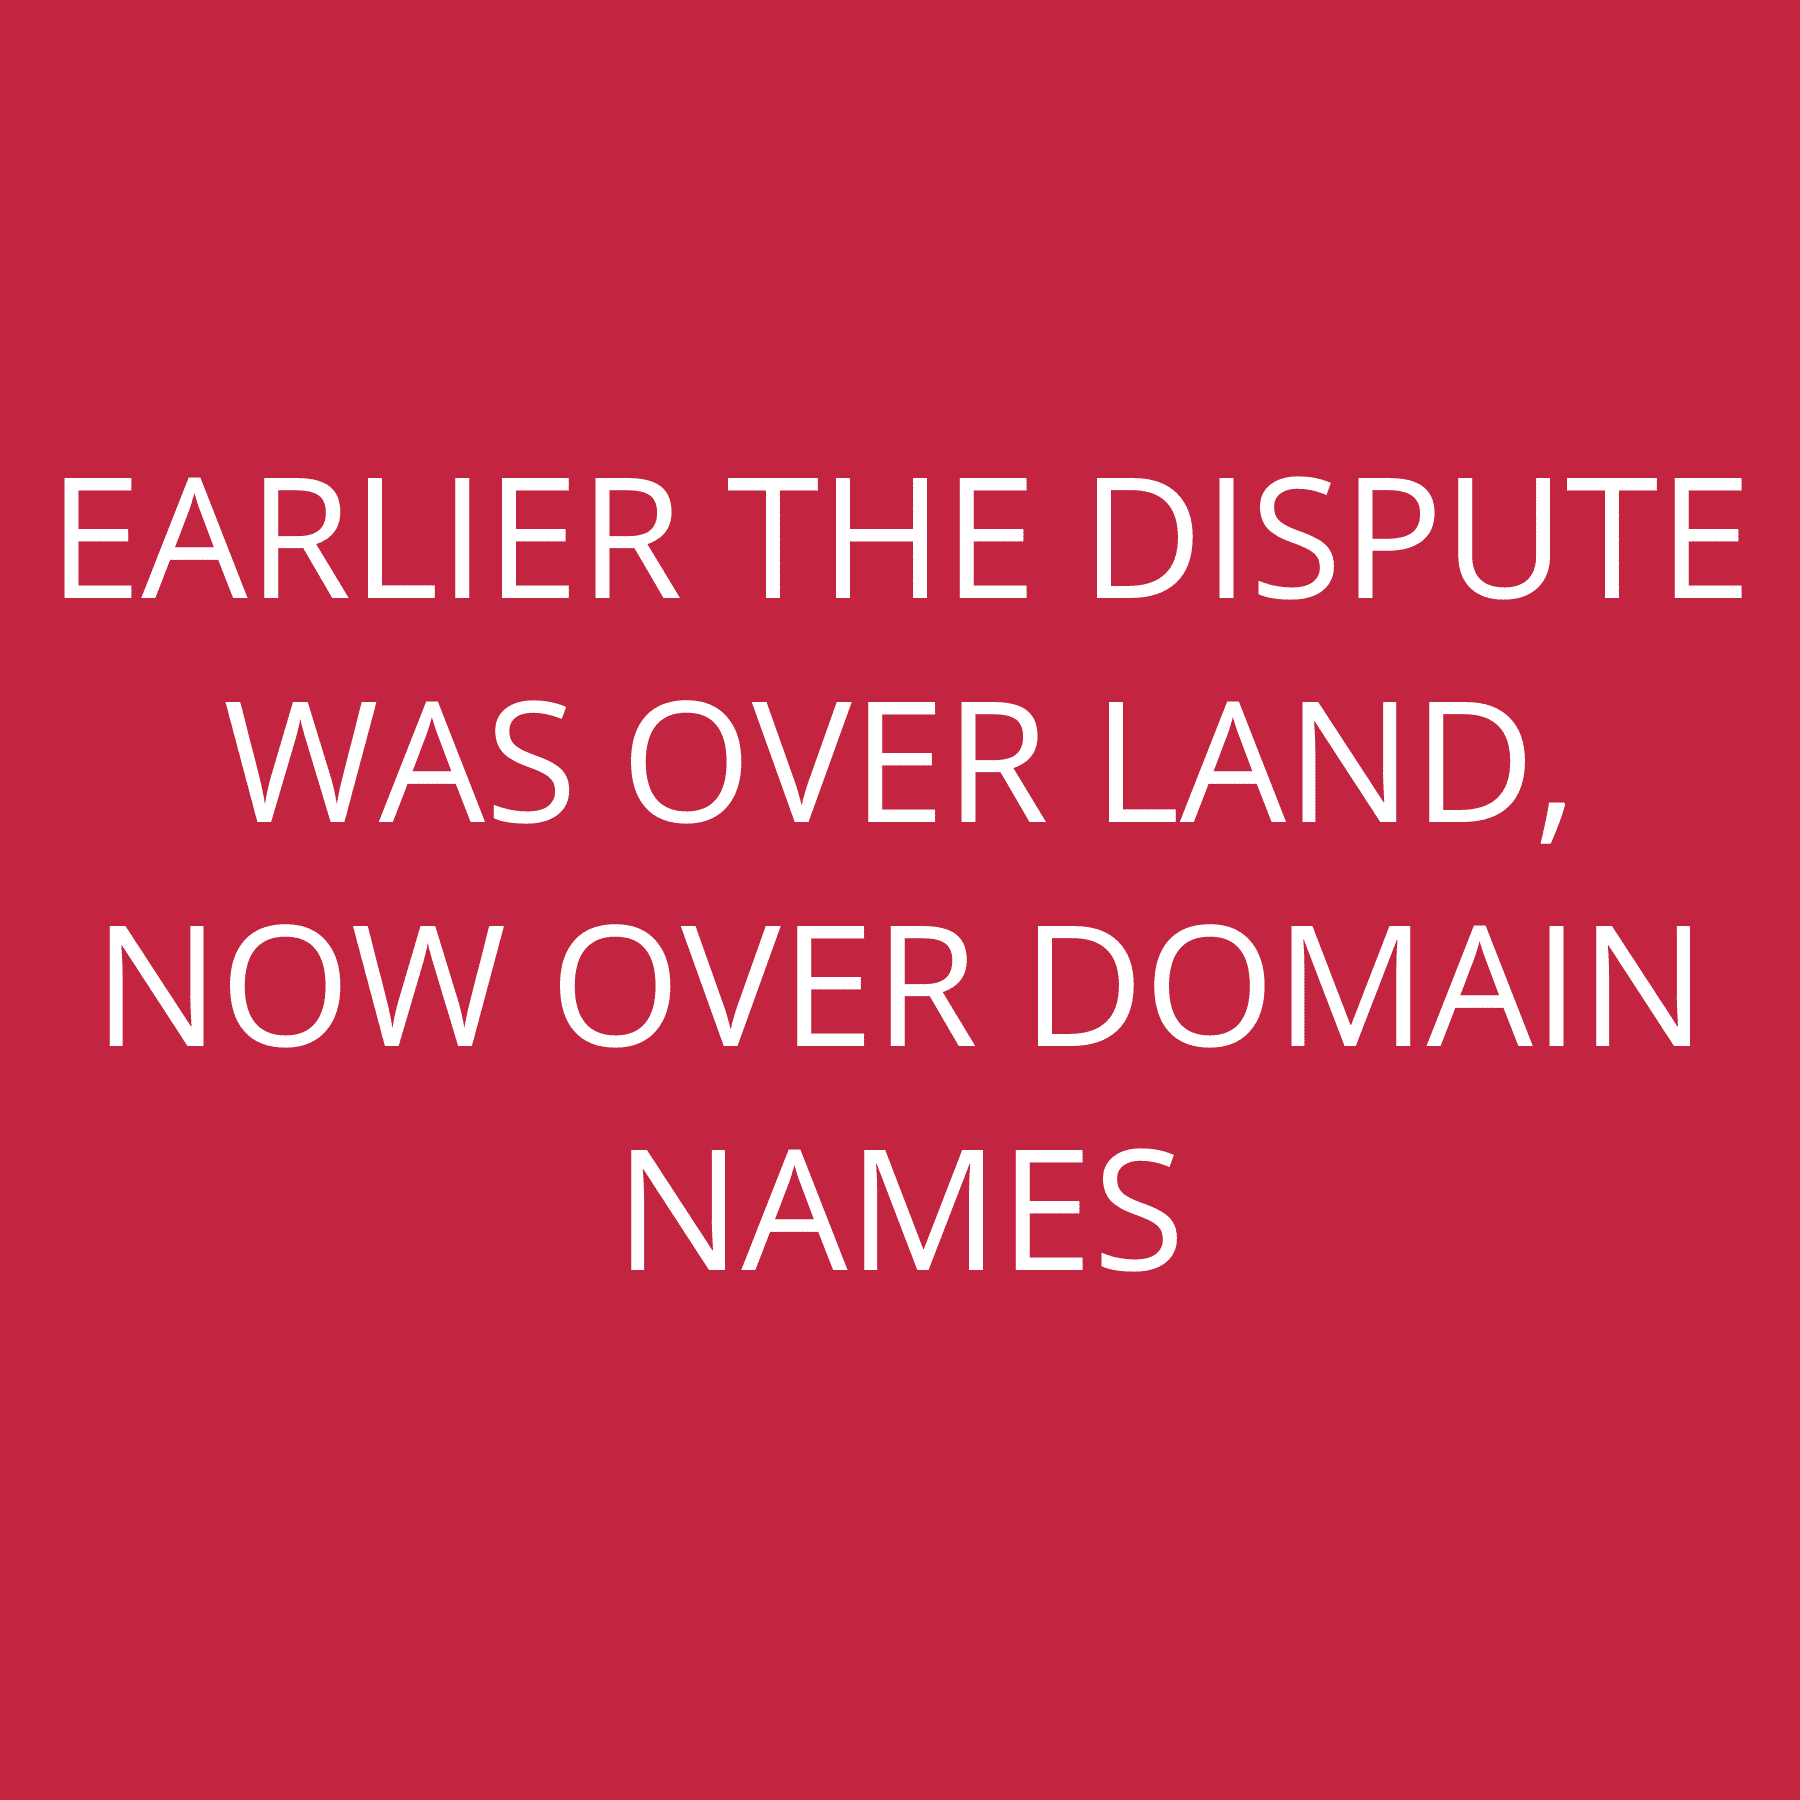 Earlier the dispute was over land, now over domain names